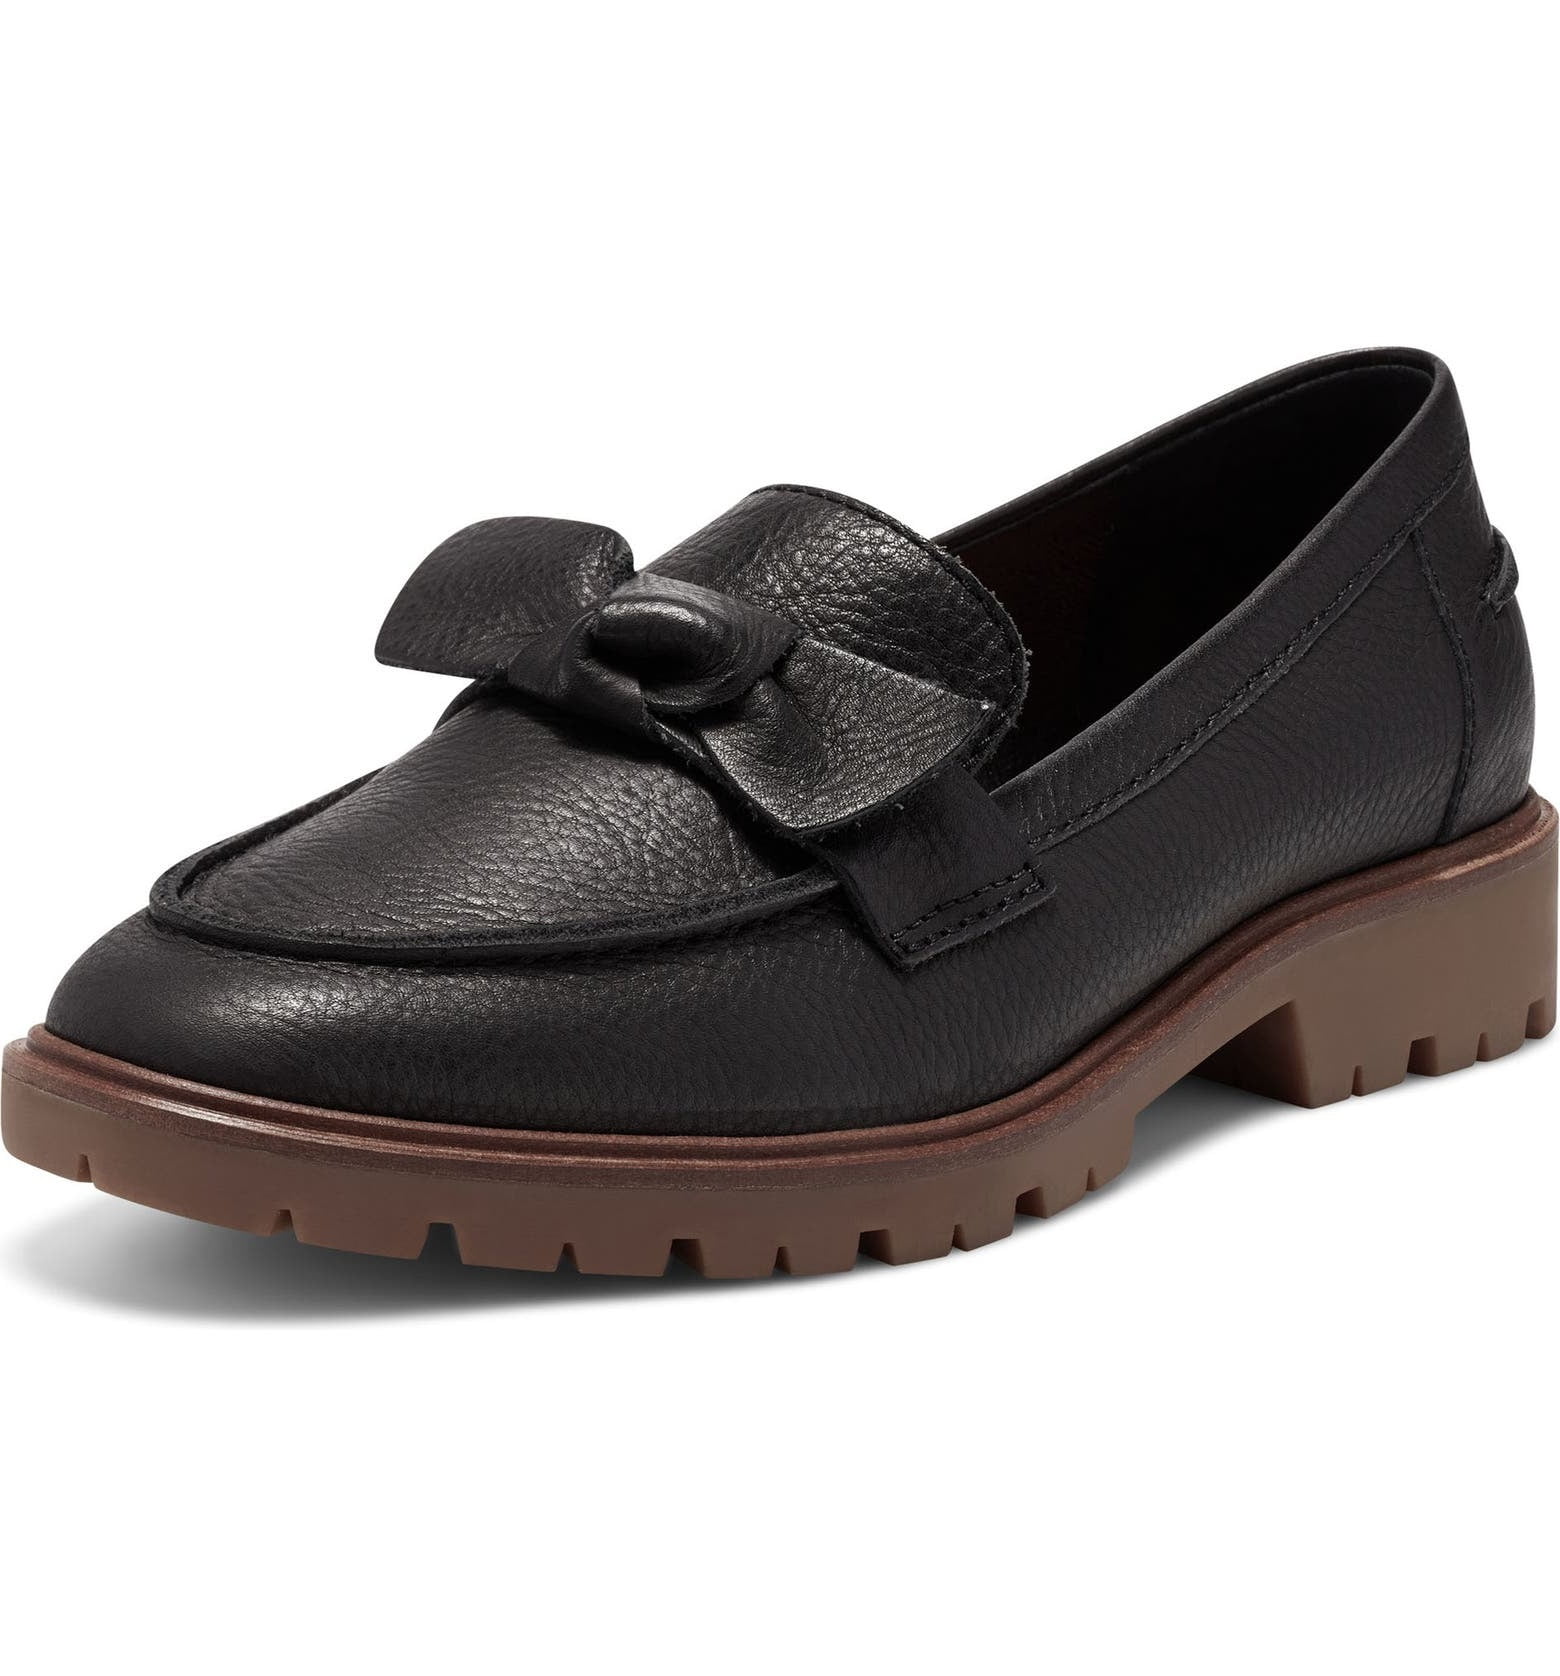 Lucky Brand Tamio Black Leather Moccasin Flat Knot Bow Detail Lug Sole ...